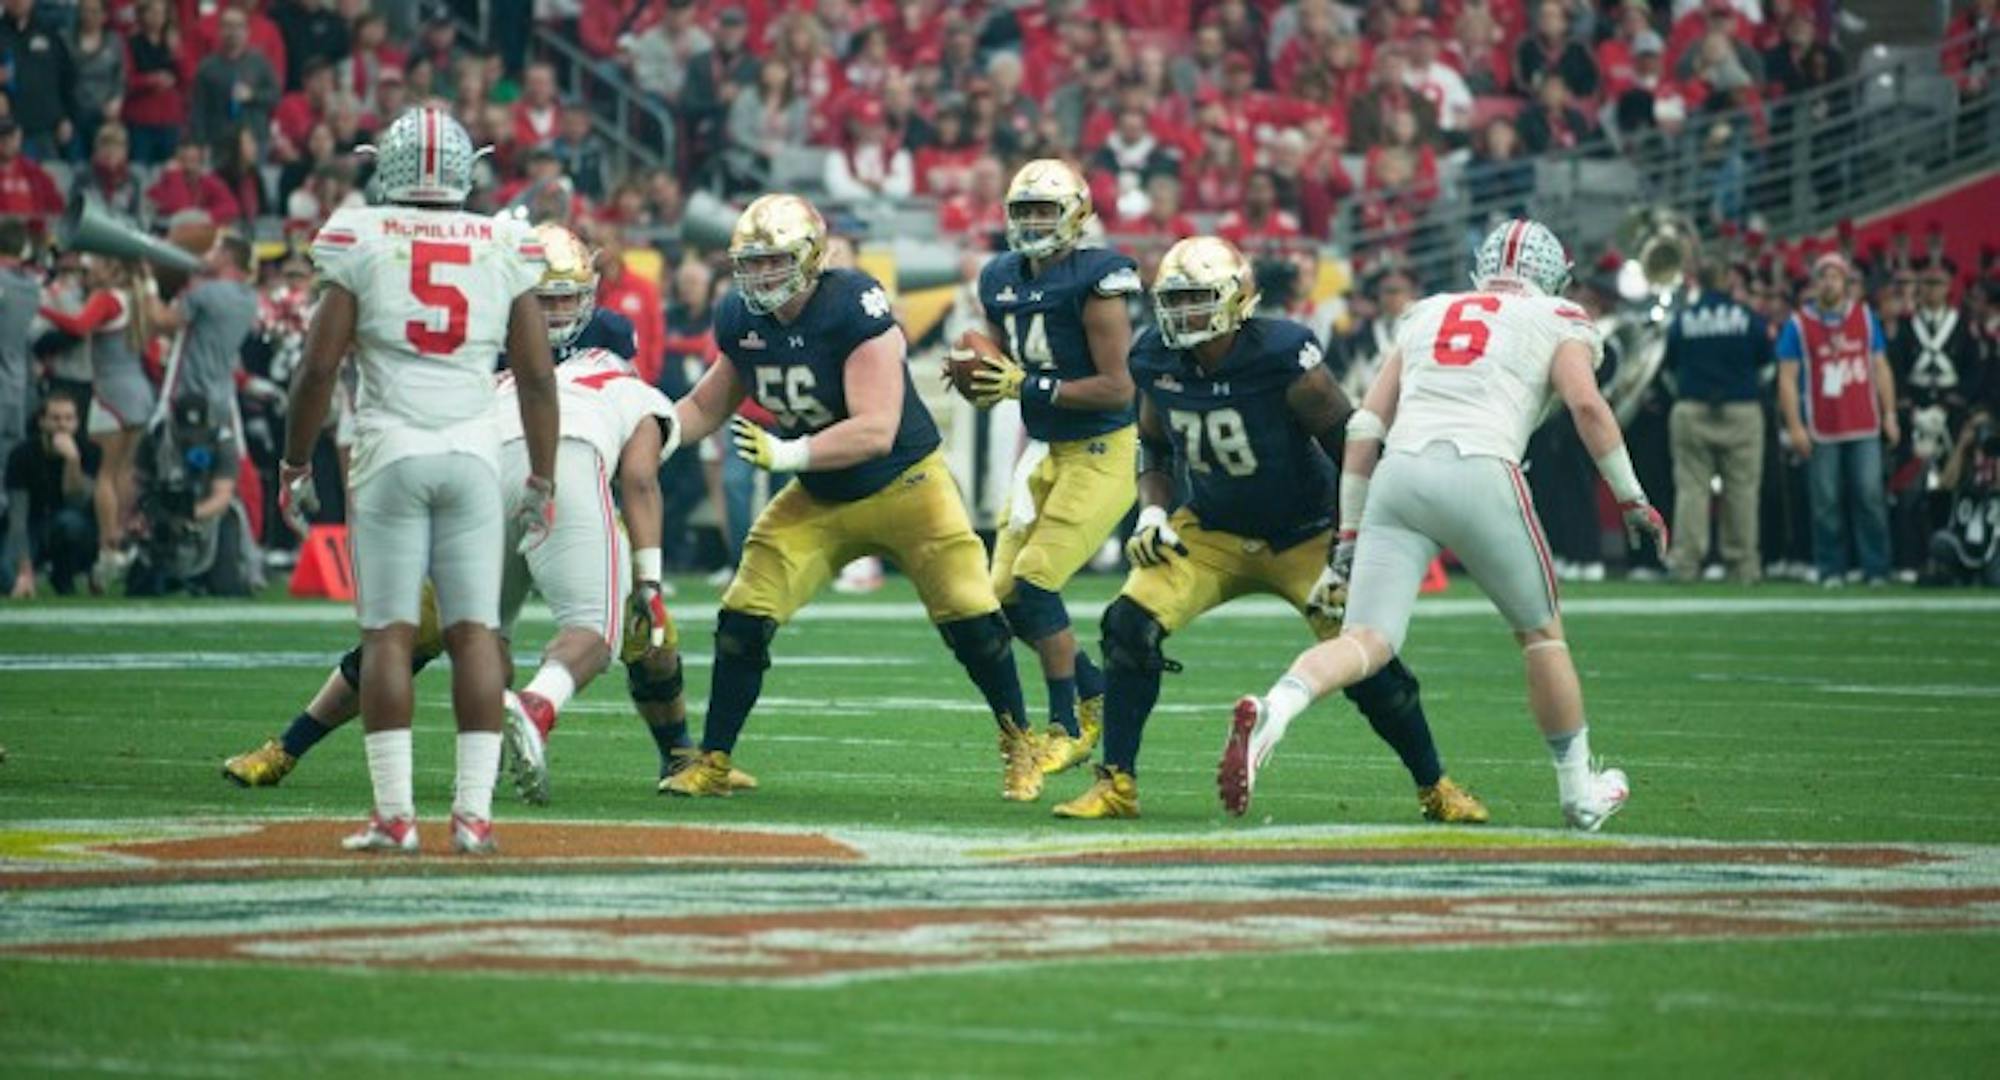 Senior offensive lineman Ronnie Stanley protects the quarterback during Notre Dame’s 44-28 loss to Ohio State on Jan. 1 in the Fiesta Bowl.